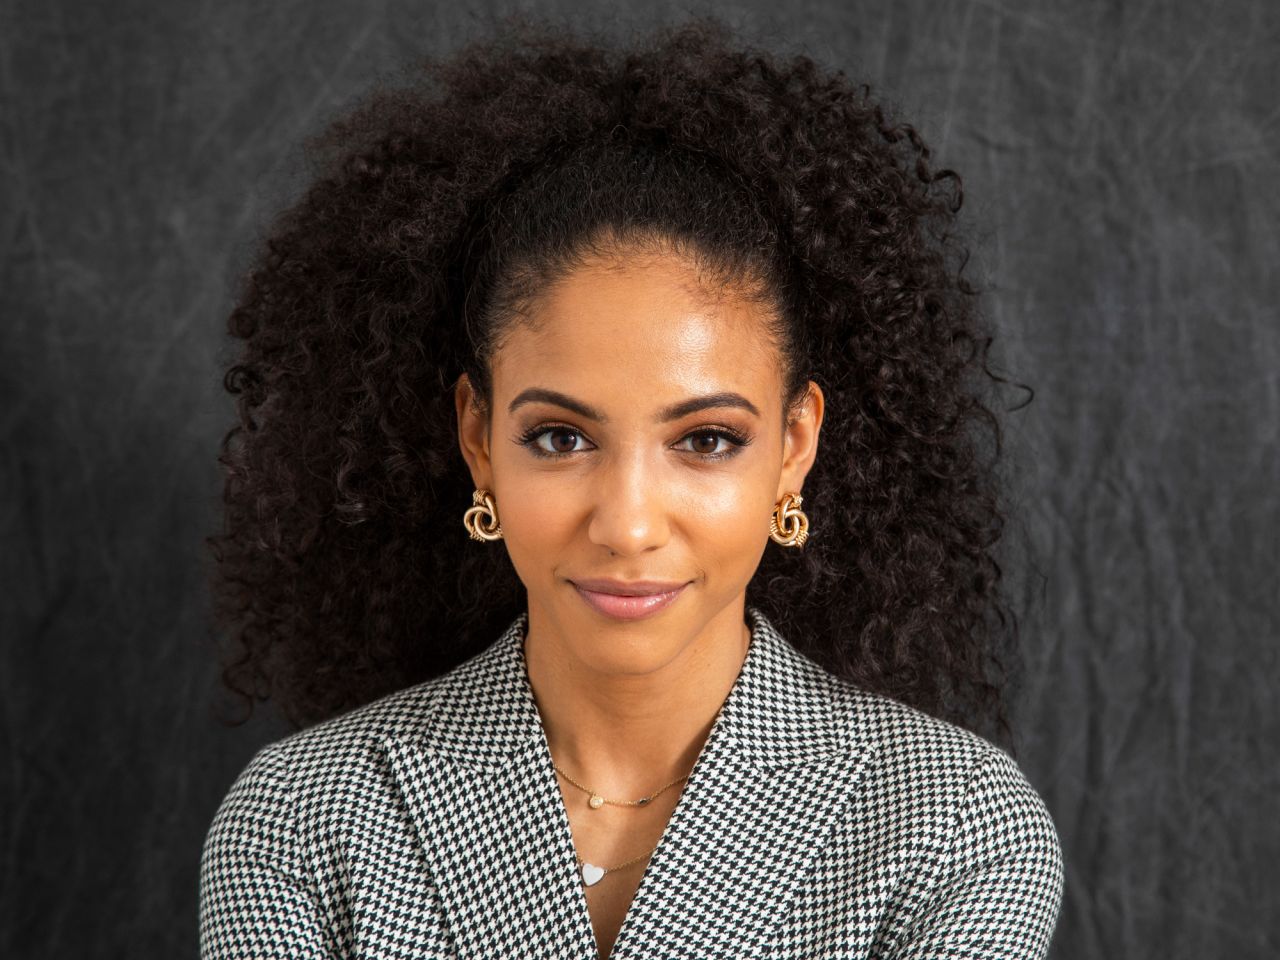 Former Miss USA Cheslie Kryst died on January 30, said her family and the New York Police Department, which is investigating her death. She was 30. Kryst was an attorney who sought to help reform America's justice system, and she was a fashion blogger and entertainment news correspondent. She was crowned Miss USA in 2019.